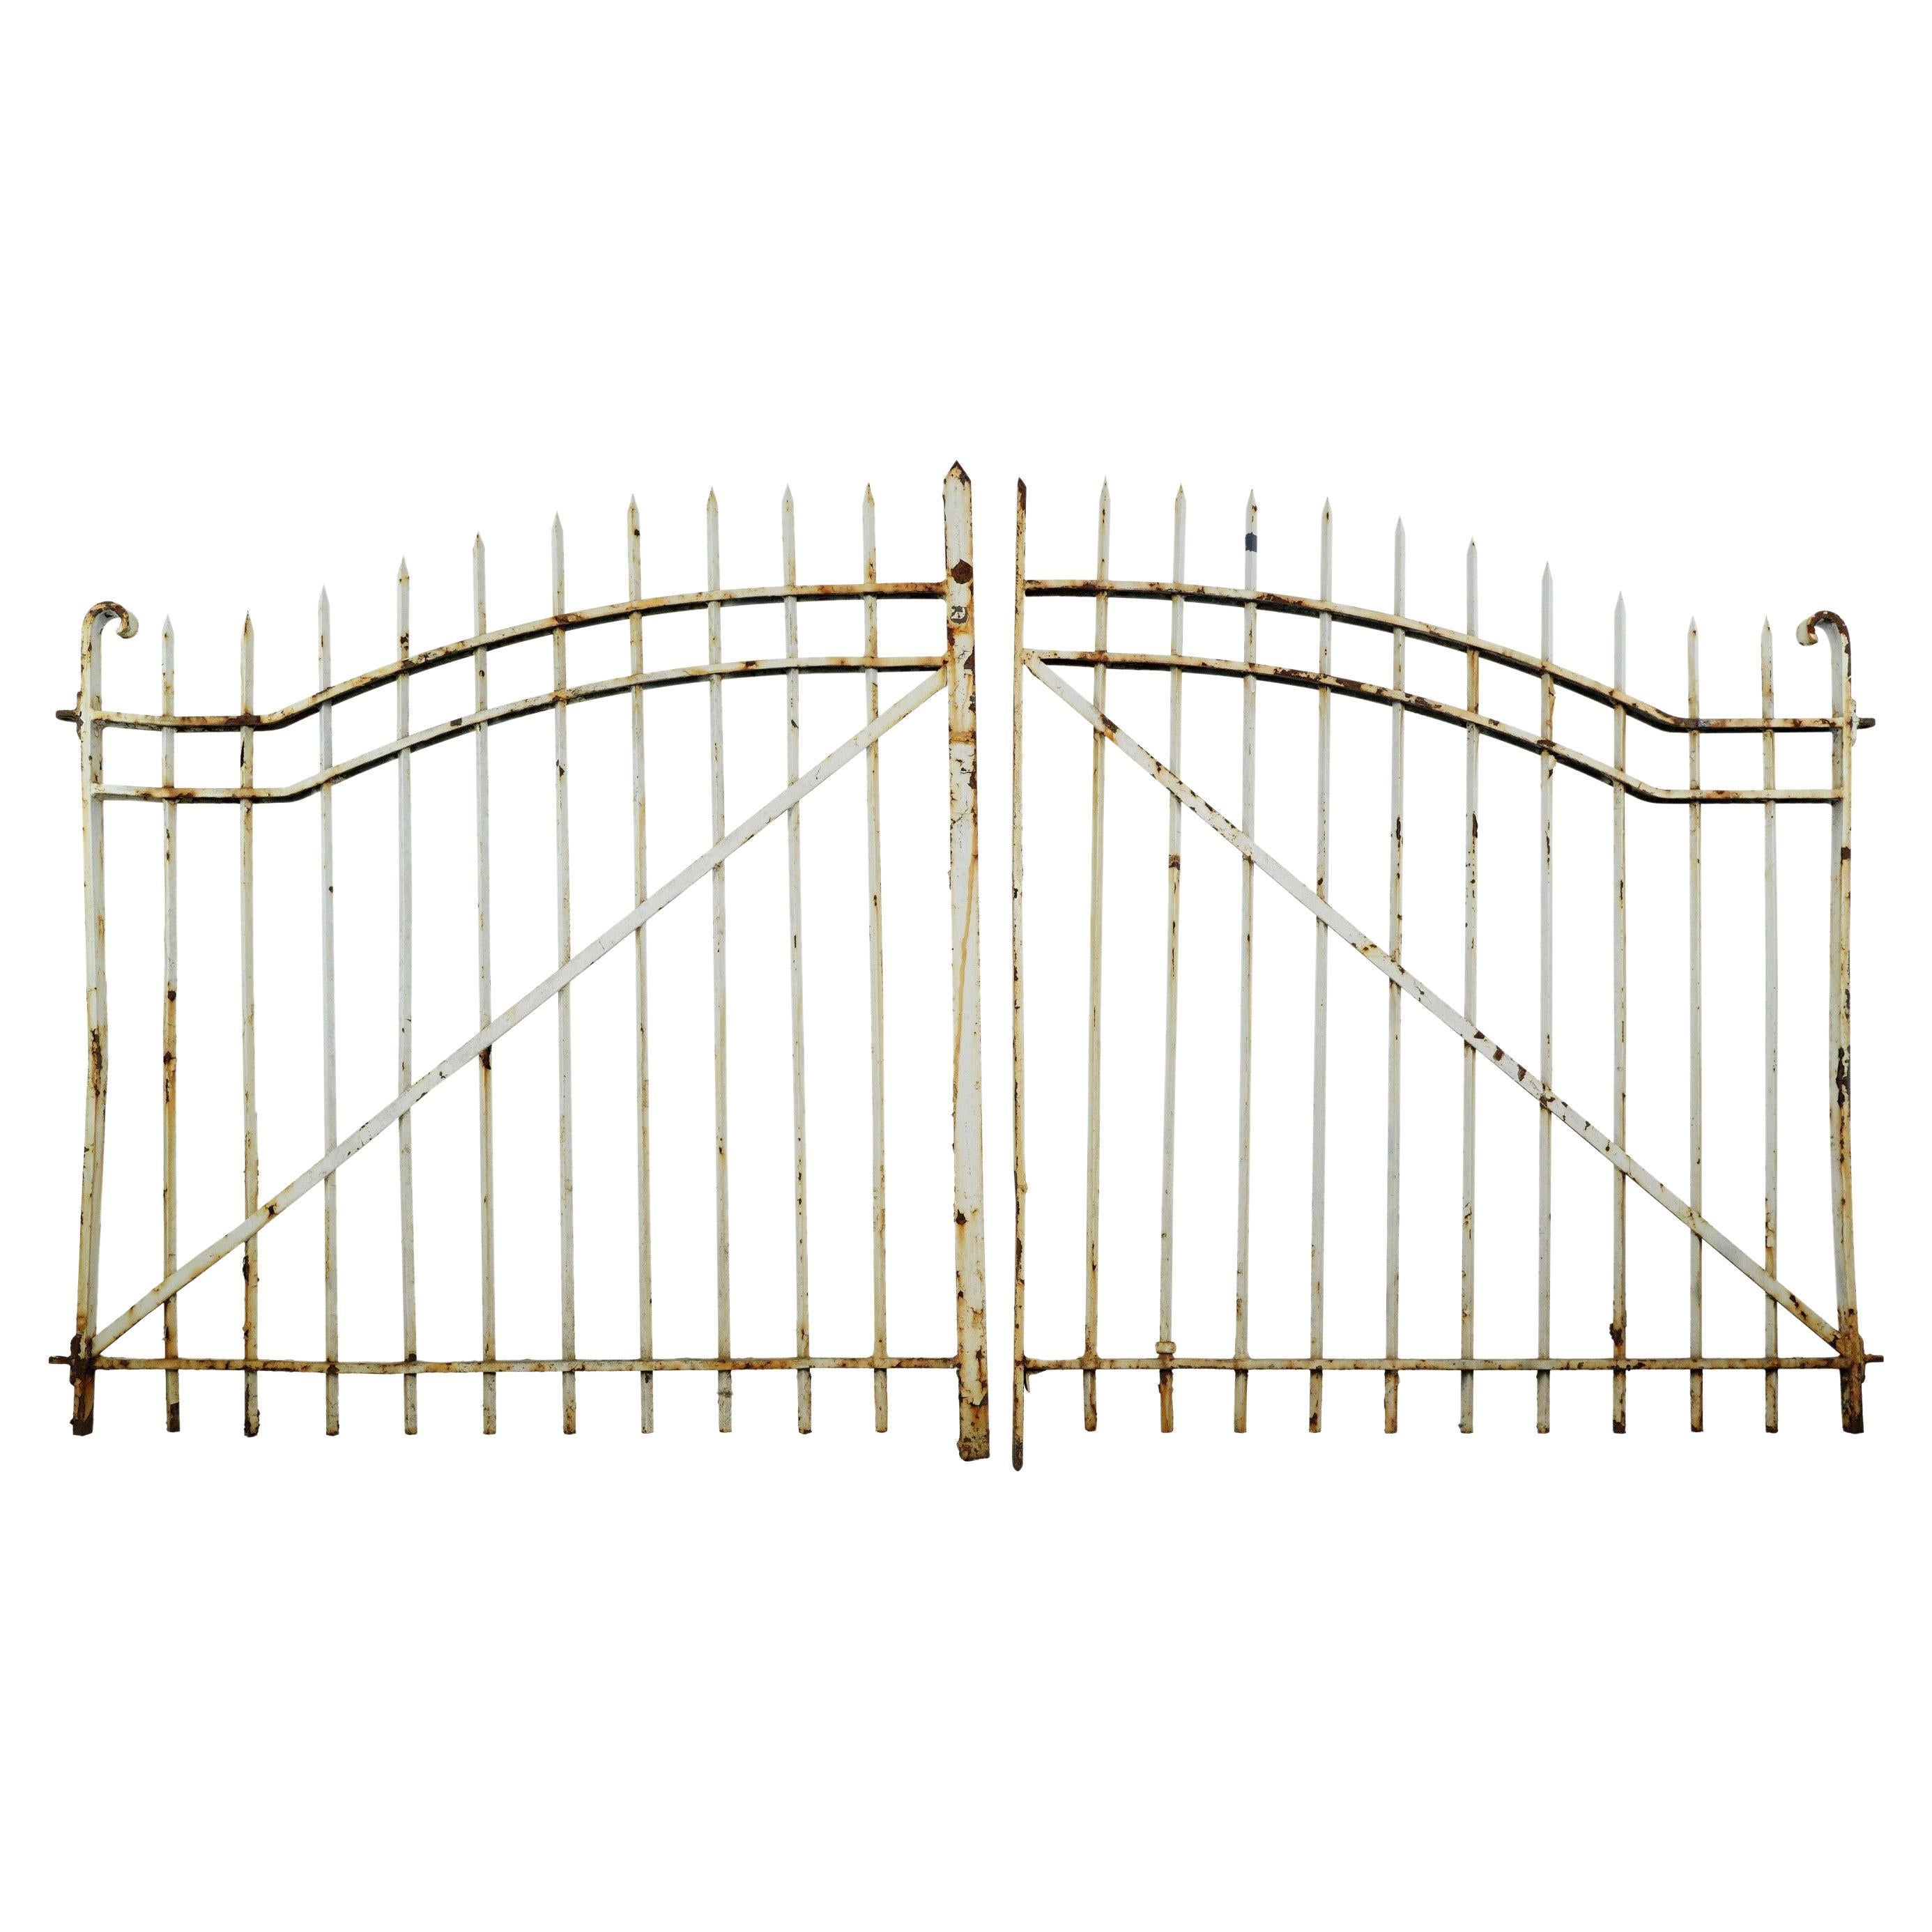 Pair 8 ft Wide Wrought Iron Driveway Entry Gate Set For Sale